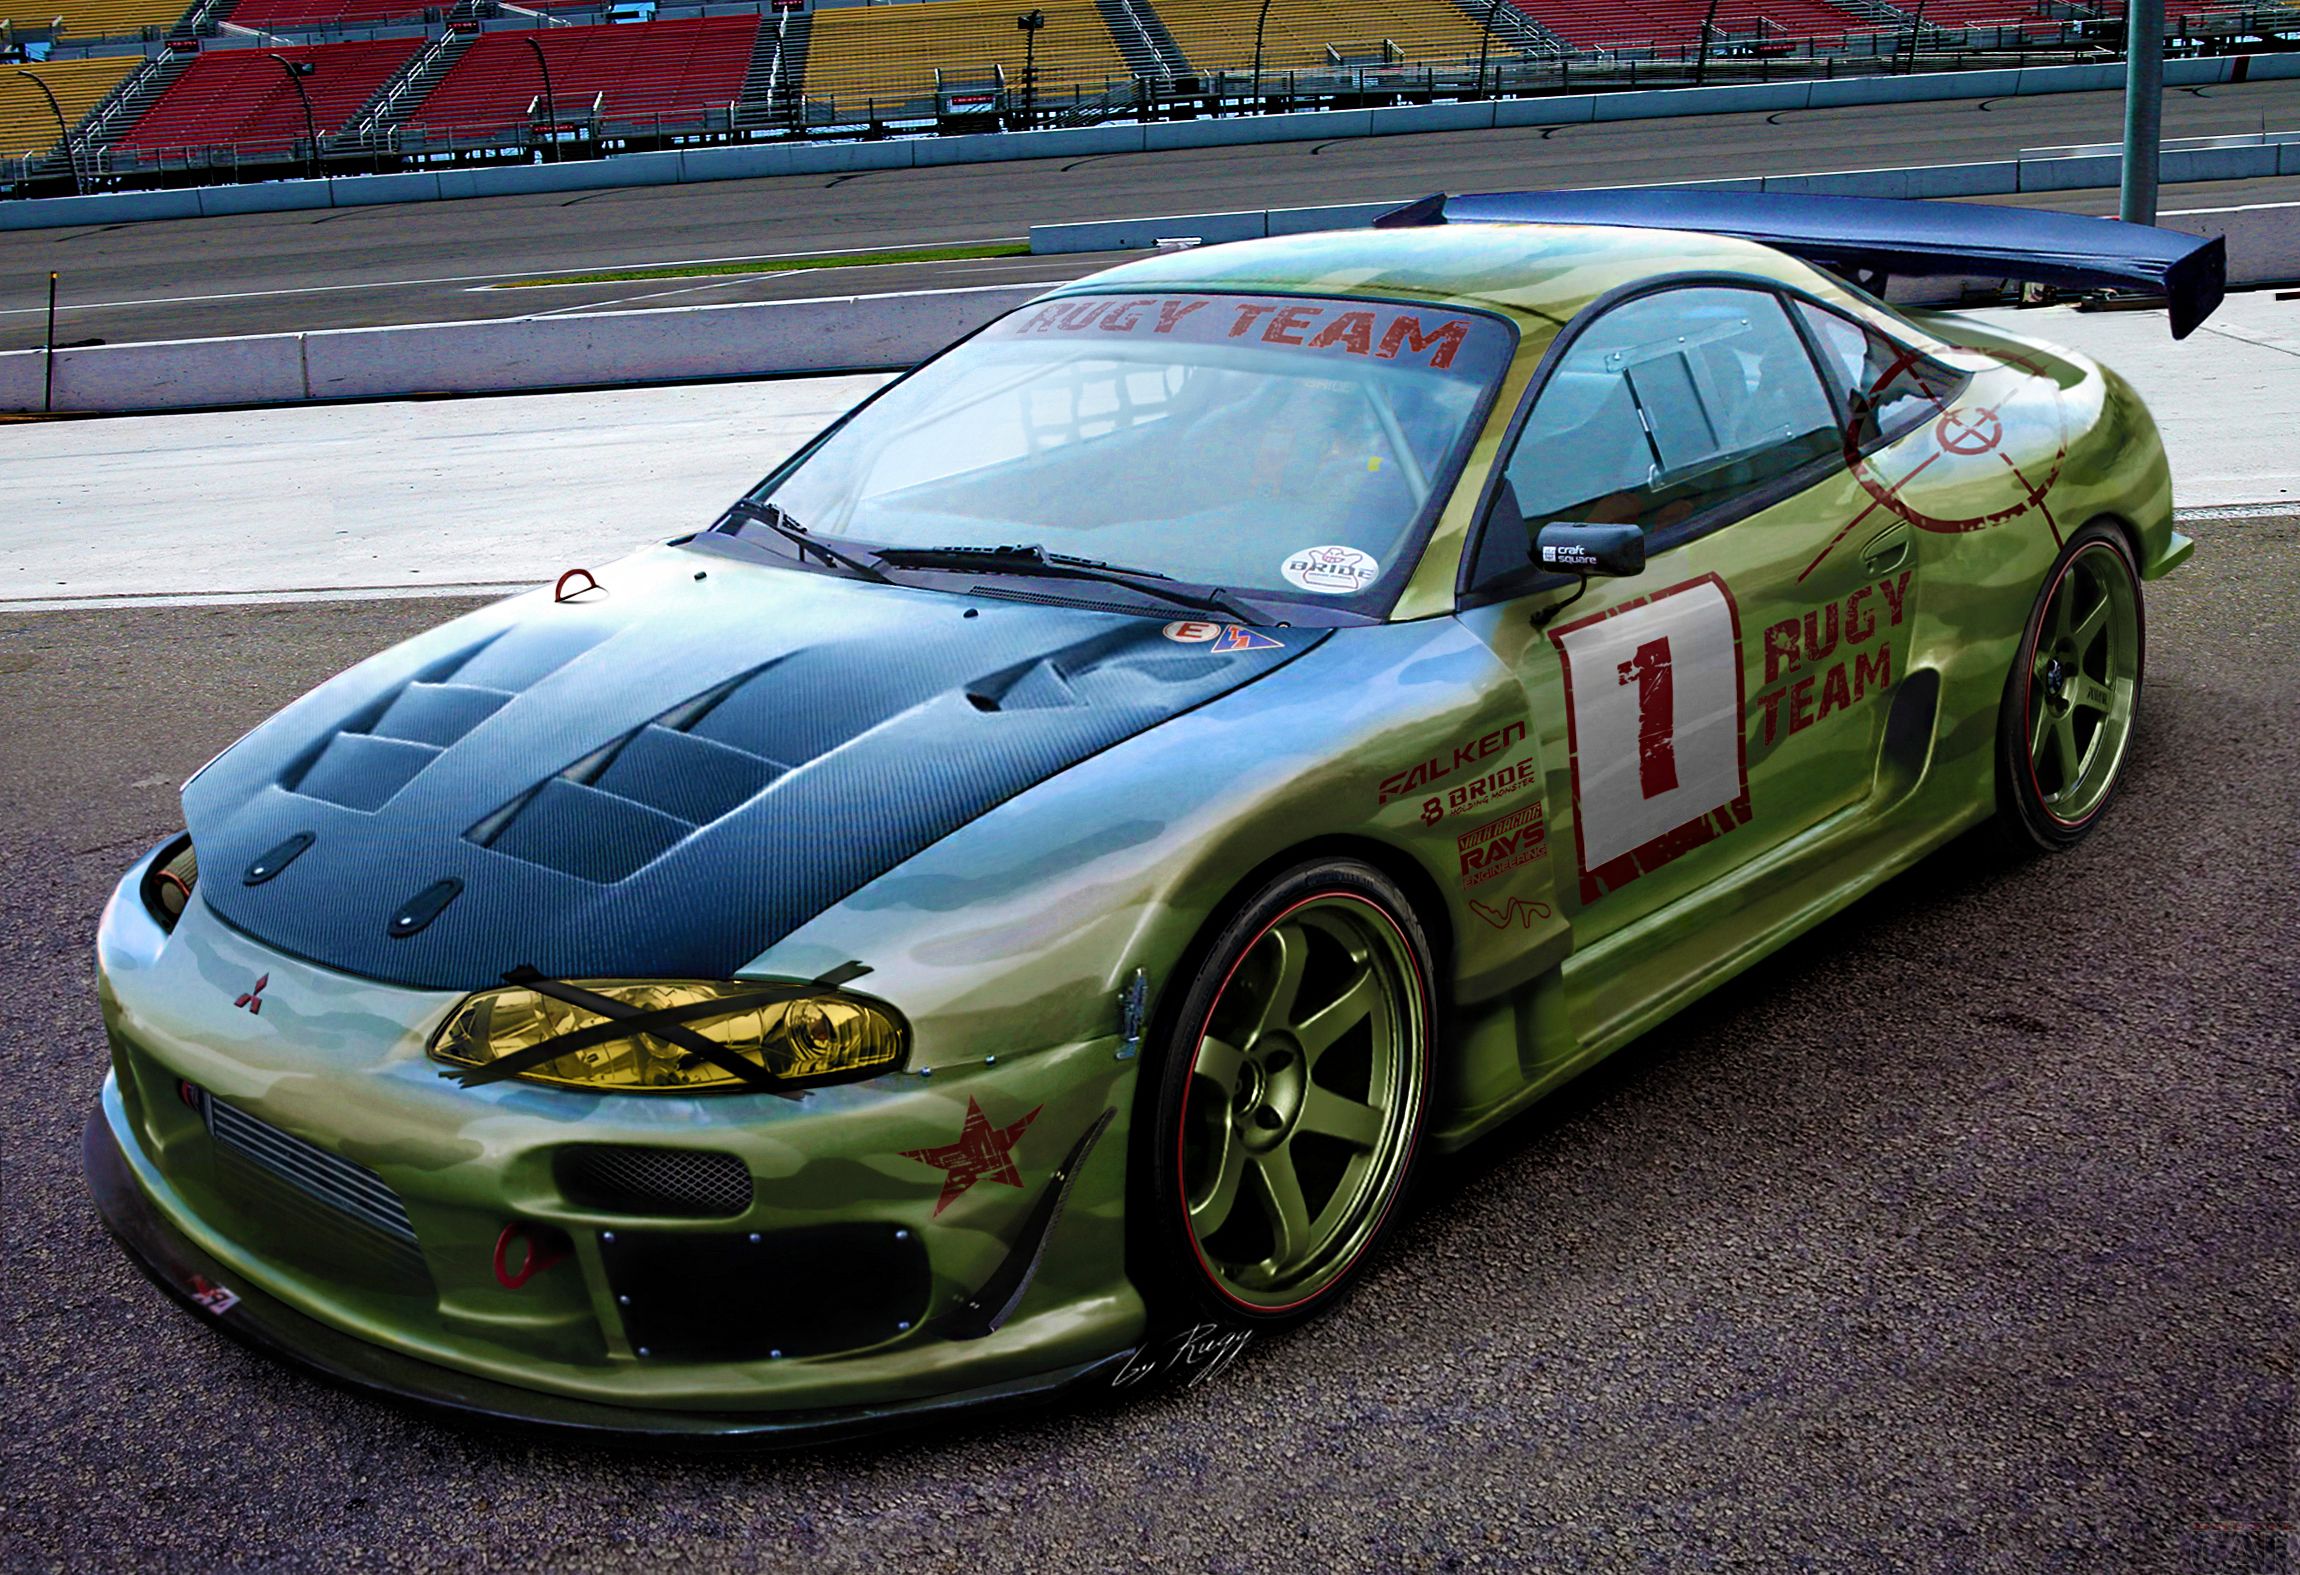 Wallpapers With Immediate Prompt Greyhound Car Mitsubishi - Eclipse Bomex Body Kit - HD Wallpaper 